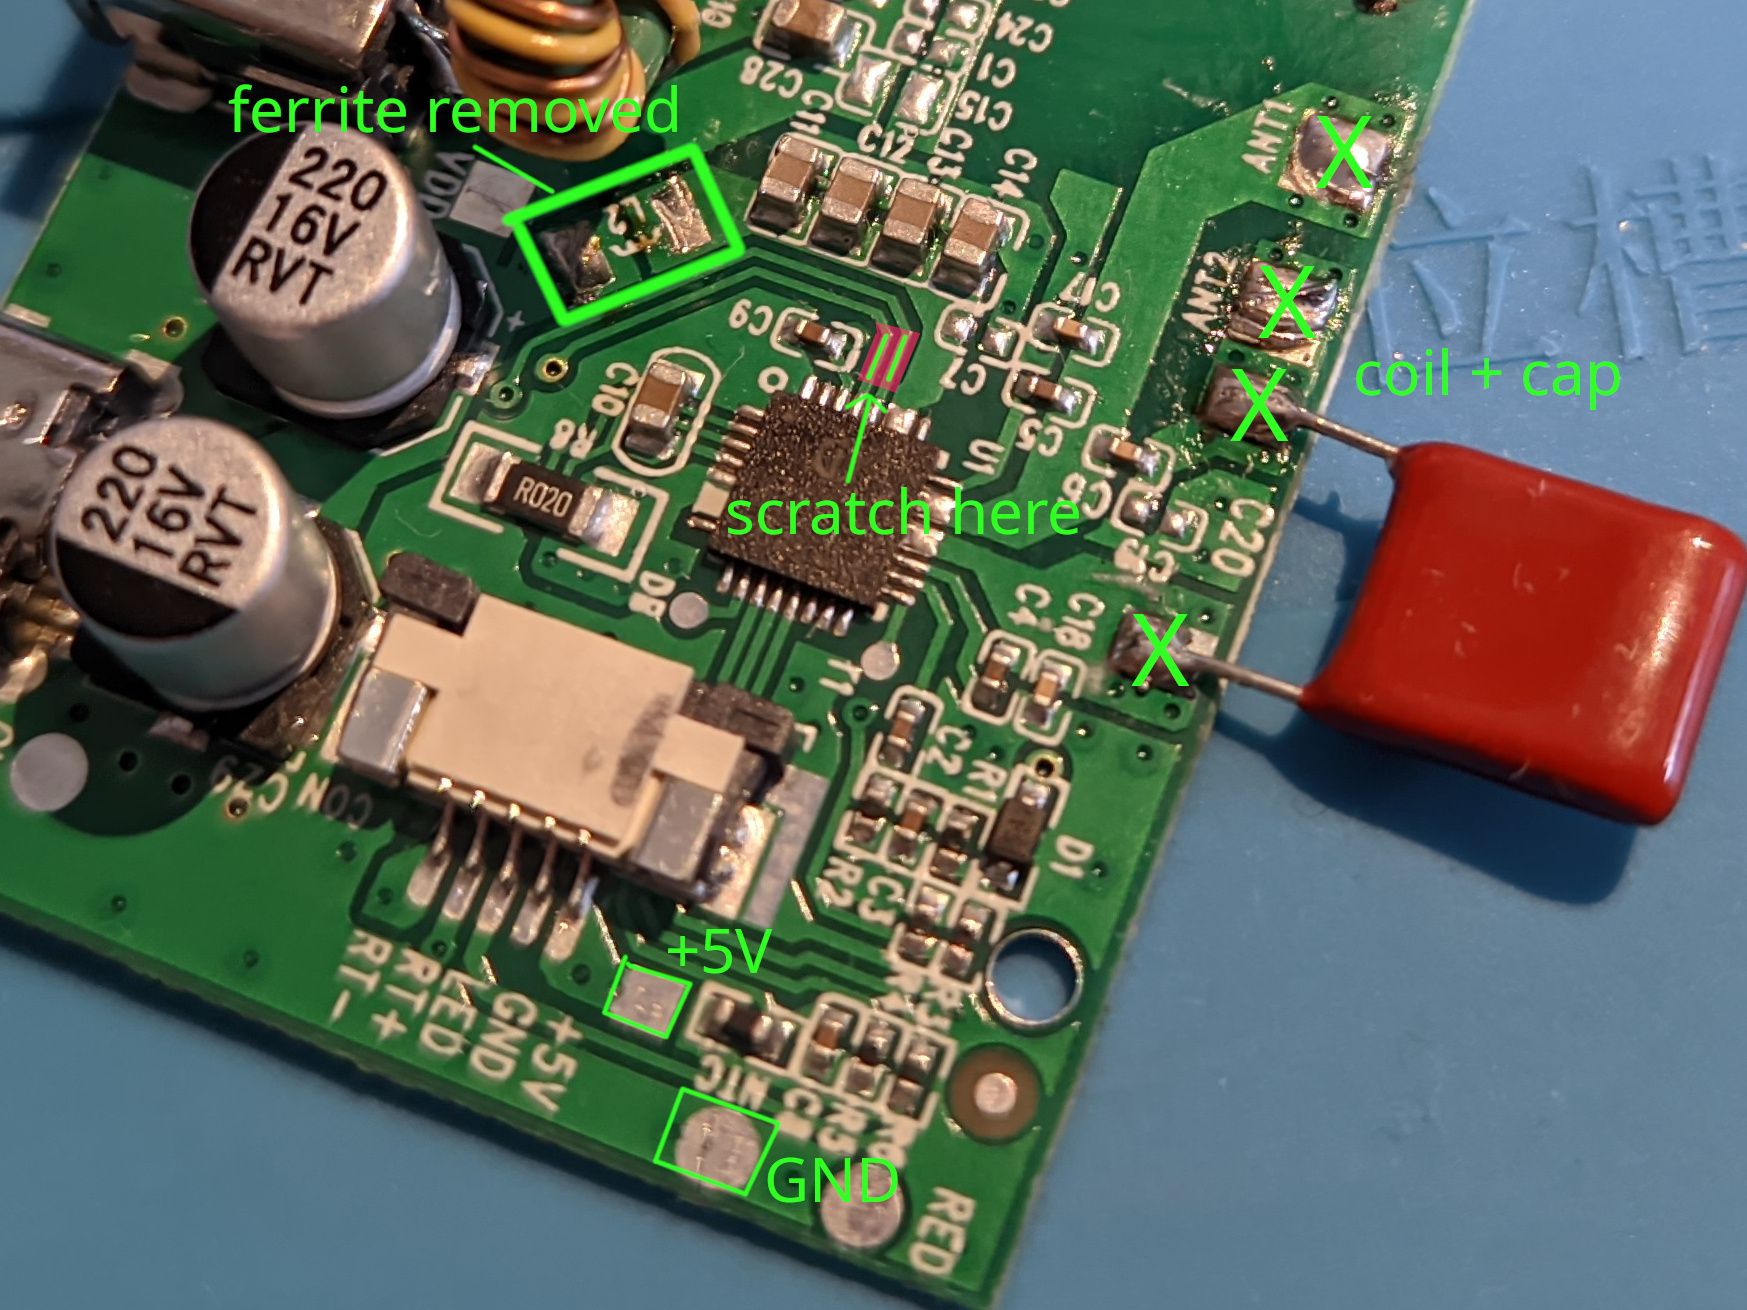 Some markings showing which parts on the PCB need to be changed.